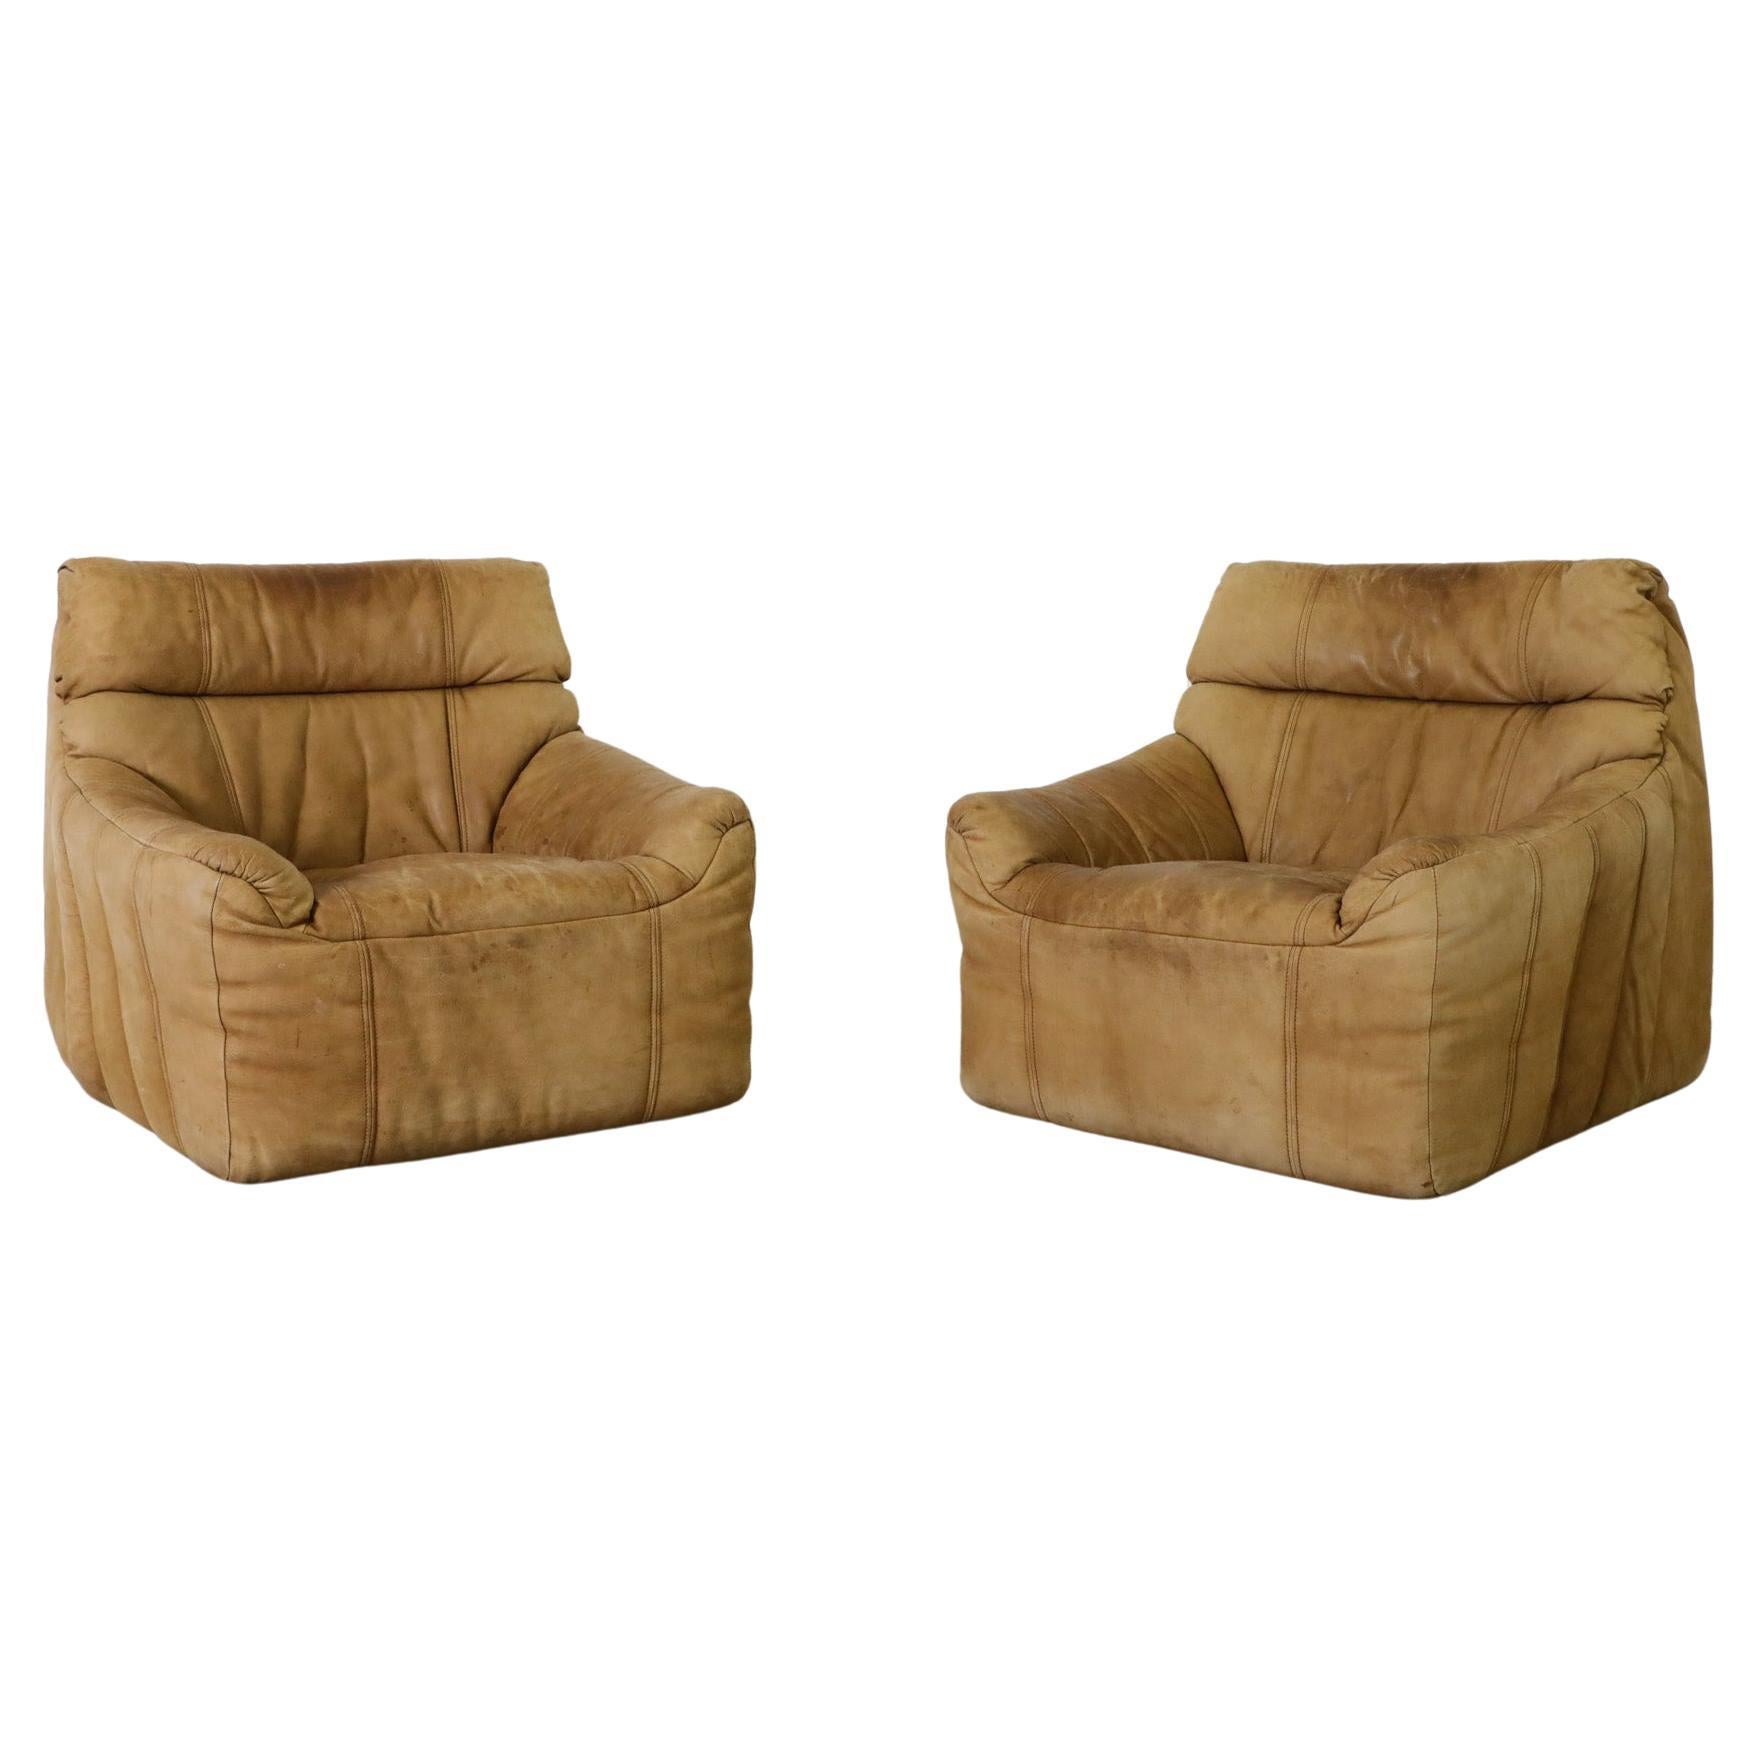 Pair of 1970s Rolf Benz Buck Leather Lounge Chairs